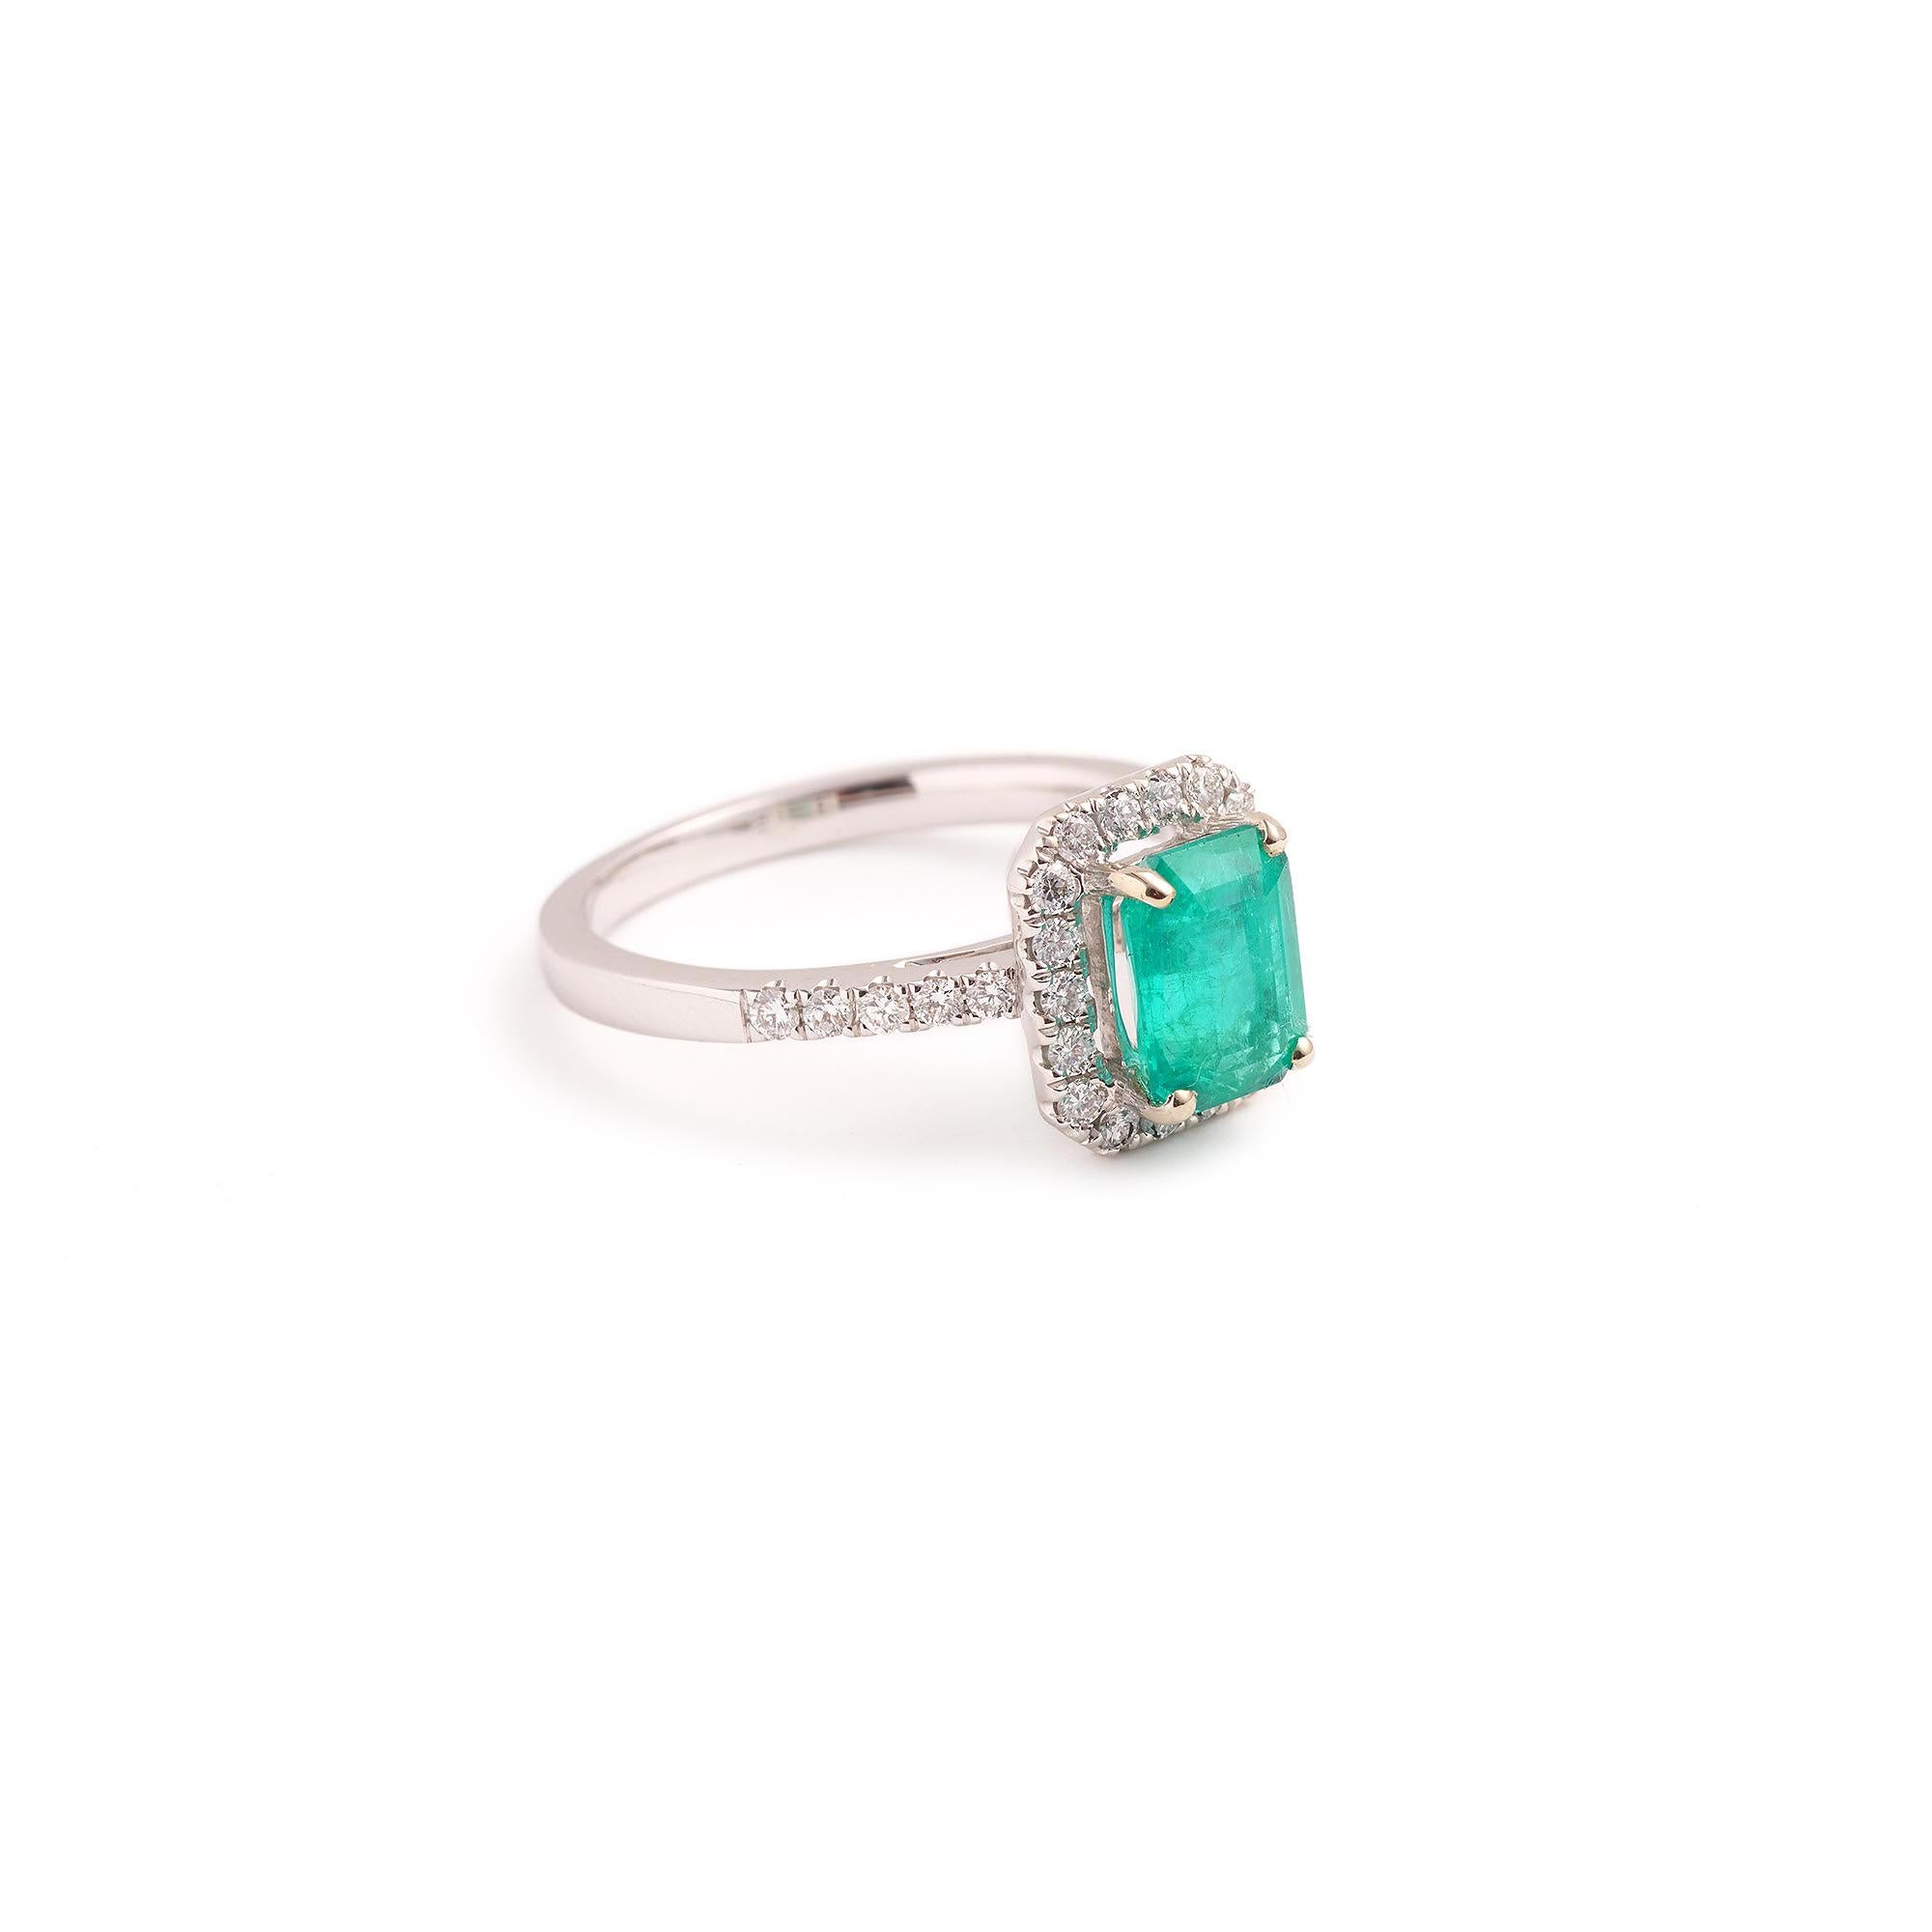 Elegant 18 carats white gold ring set with a 1.27 carats Colombian emerald and diamonds.

The emerald is certified by GEM Paris Lab

Weight of the emerald: 1.27 carats

Total diamond weight: 0.33 carats

Finger size: 53 (US size: 6 1/4)

Ring's